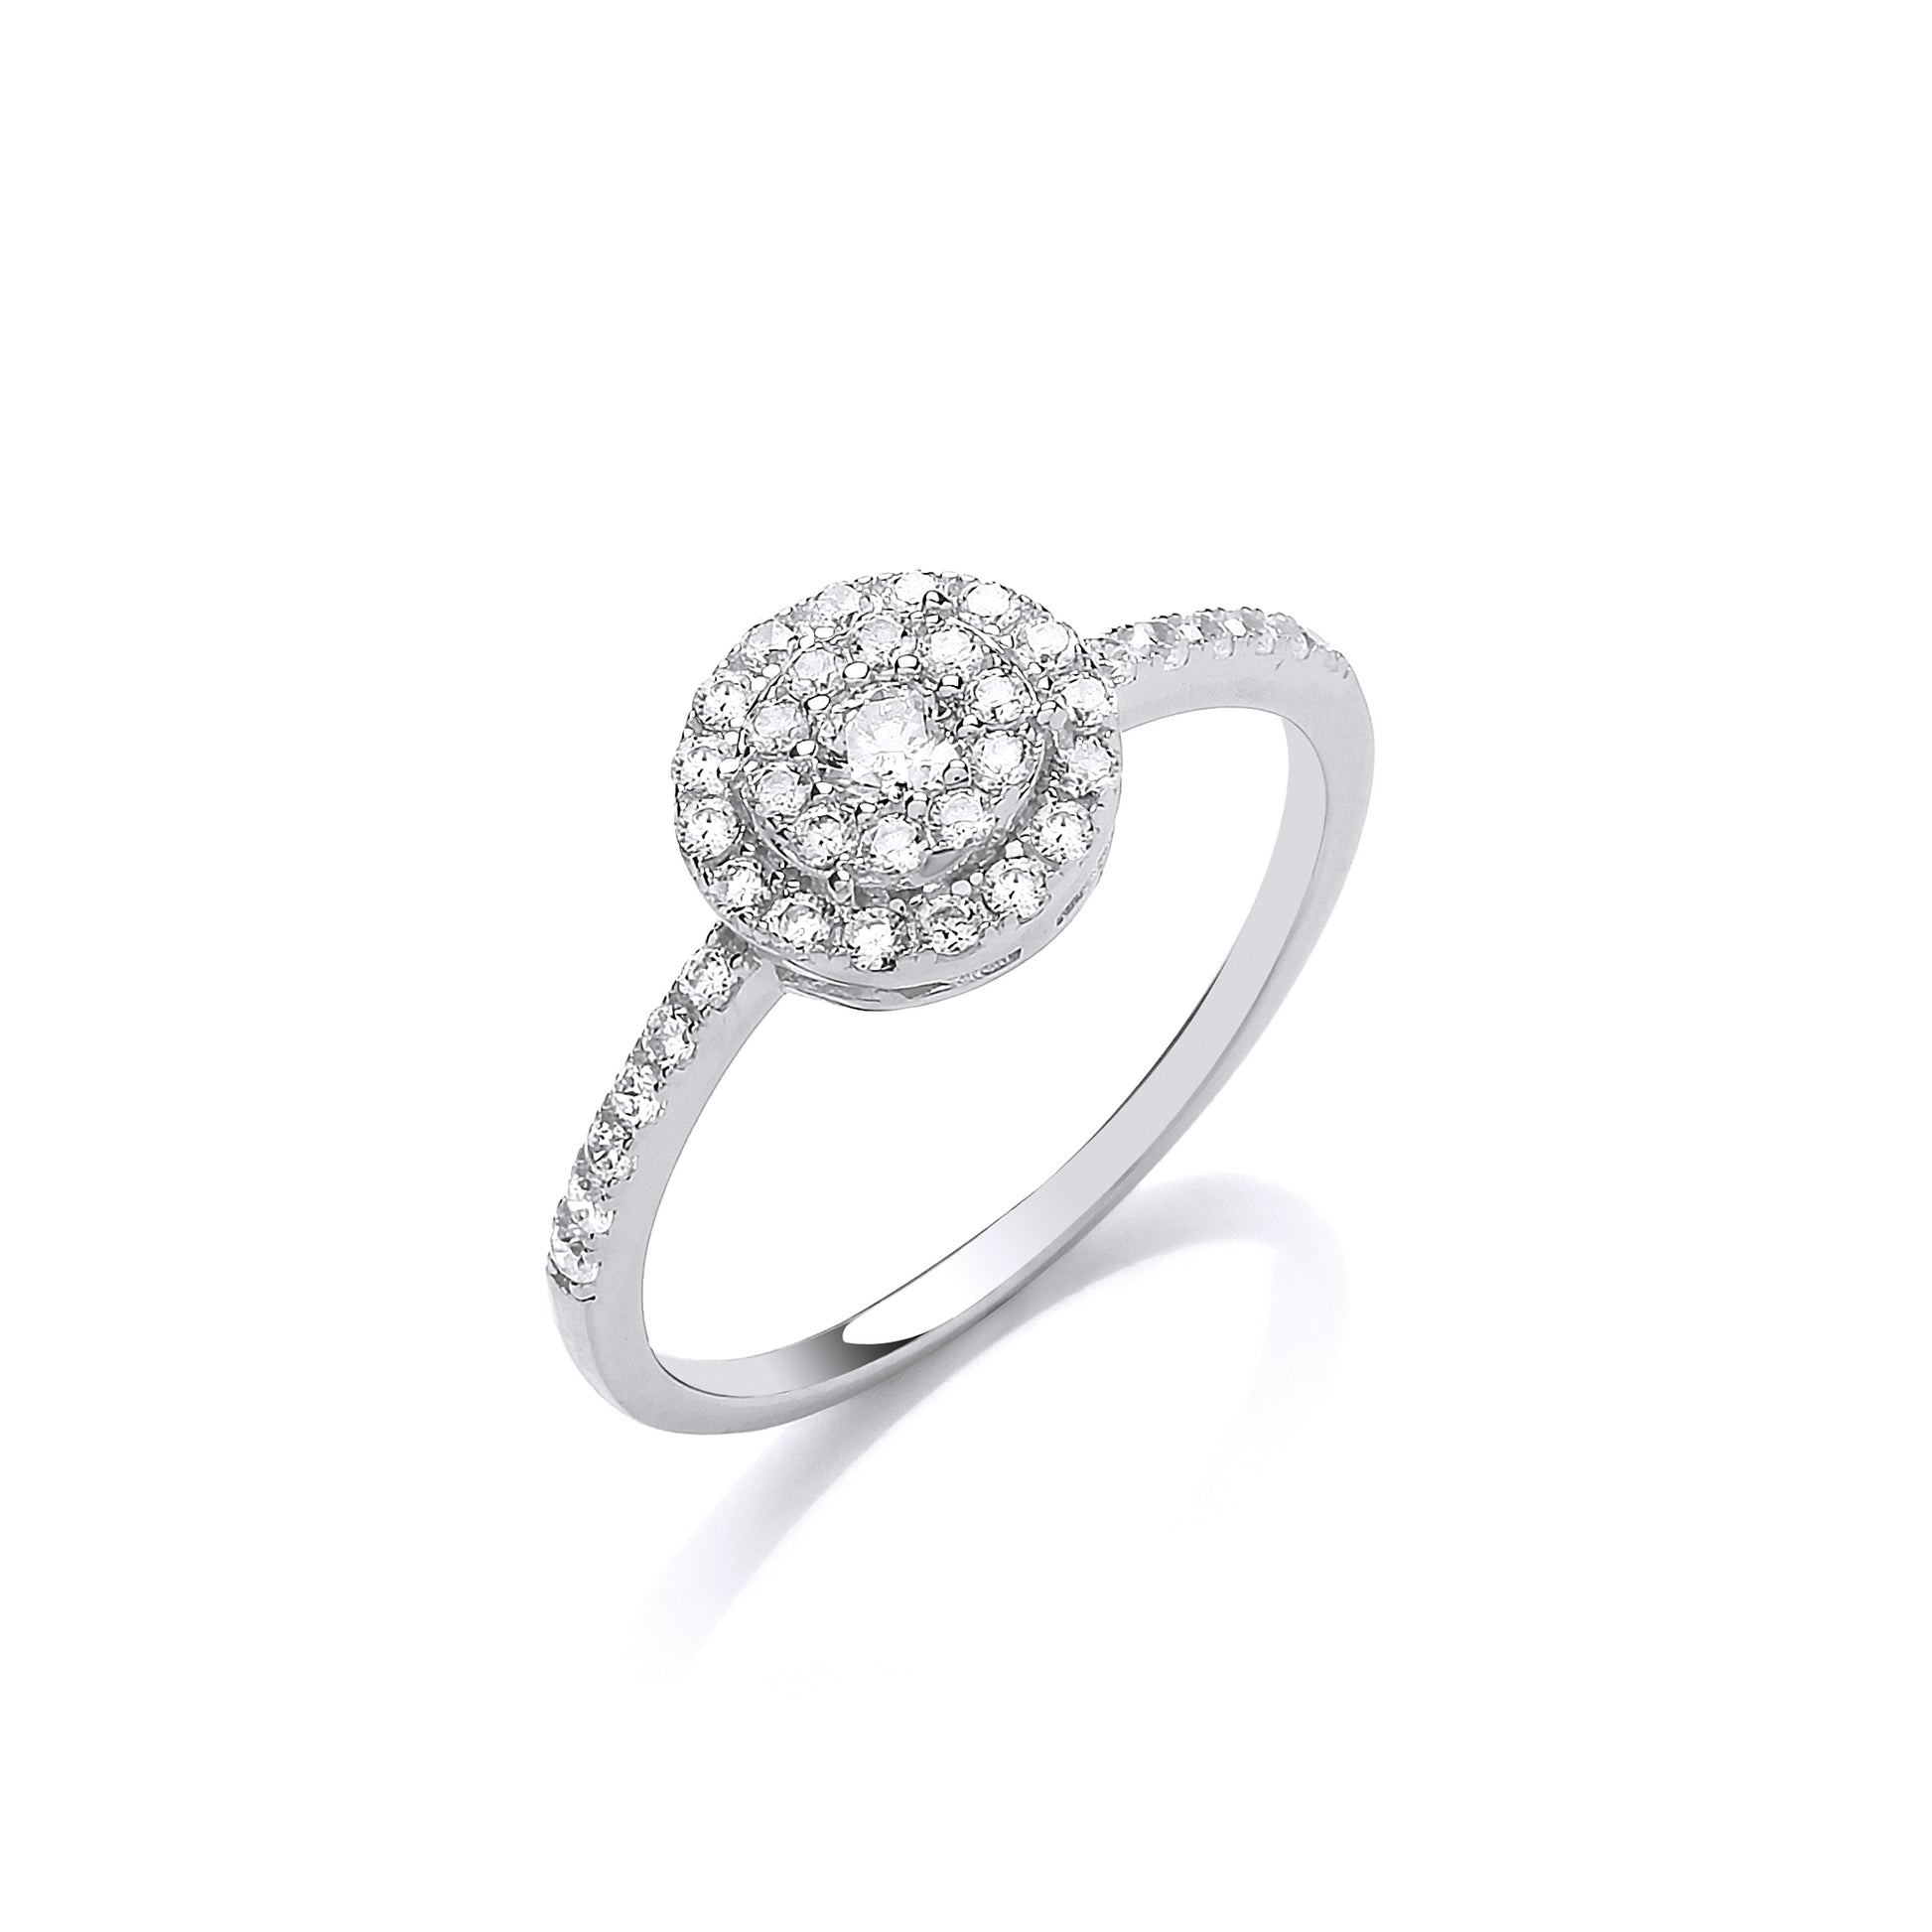 Silver  CZ 2 Tier Halo Solitaire Dress Ring - GVR841